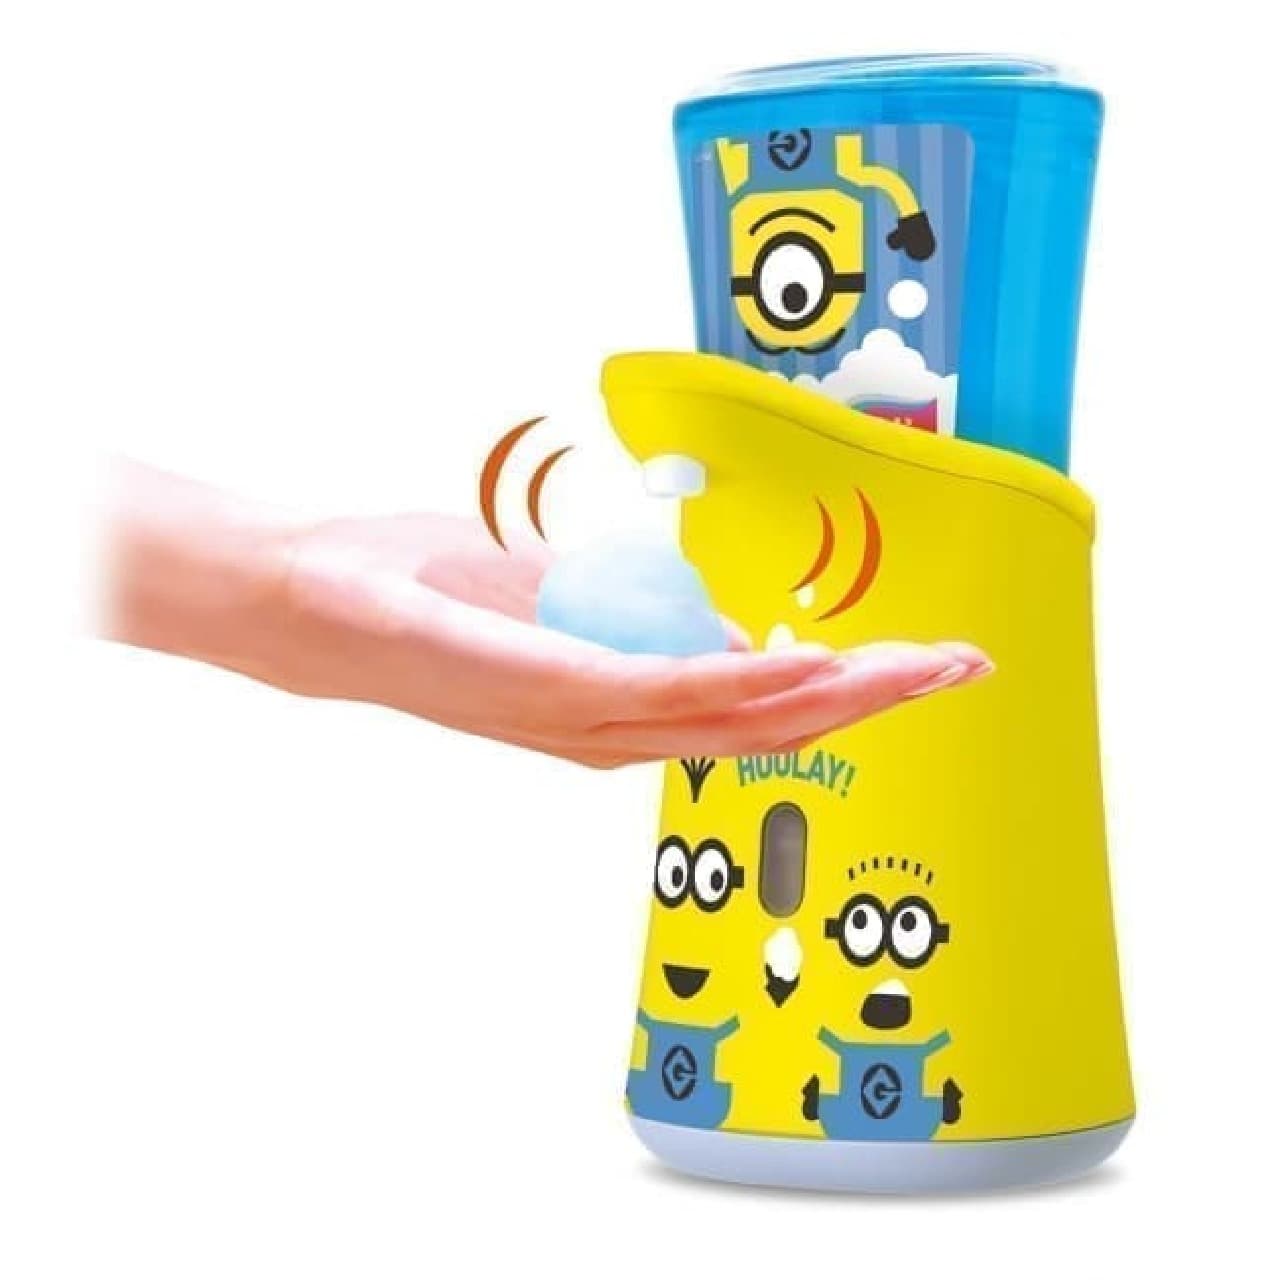 Minions are back! Limited design of "Muse No Touch Foam Hand Soap" that automatically produces bubbles